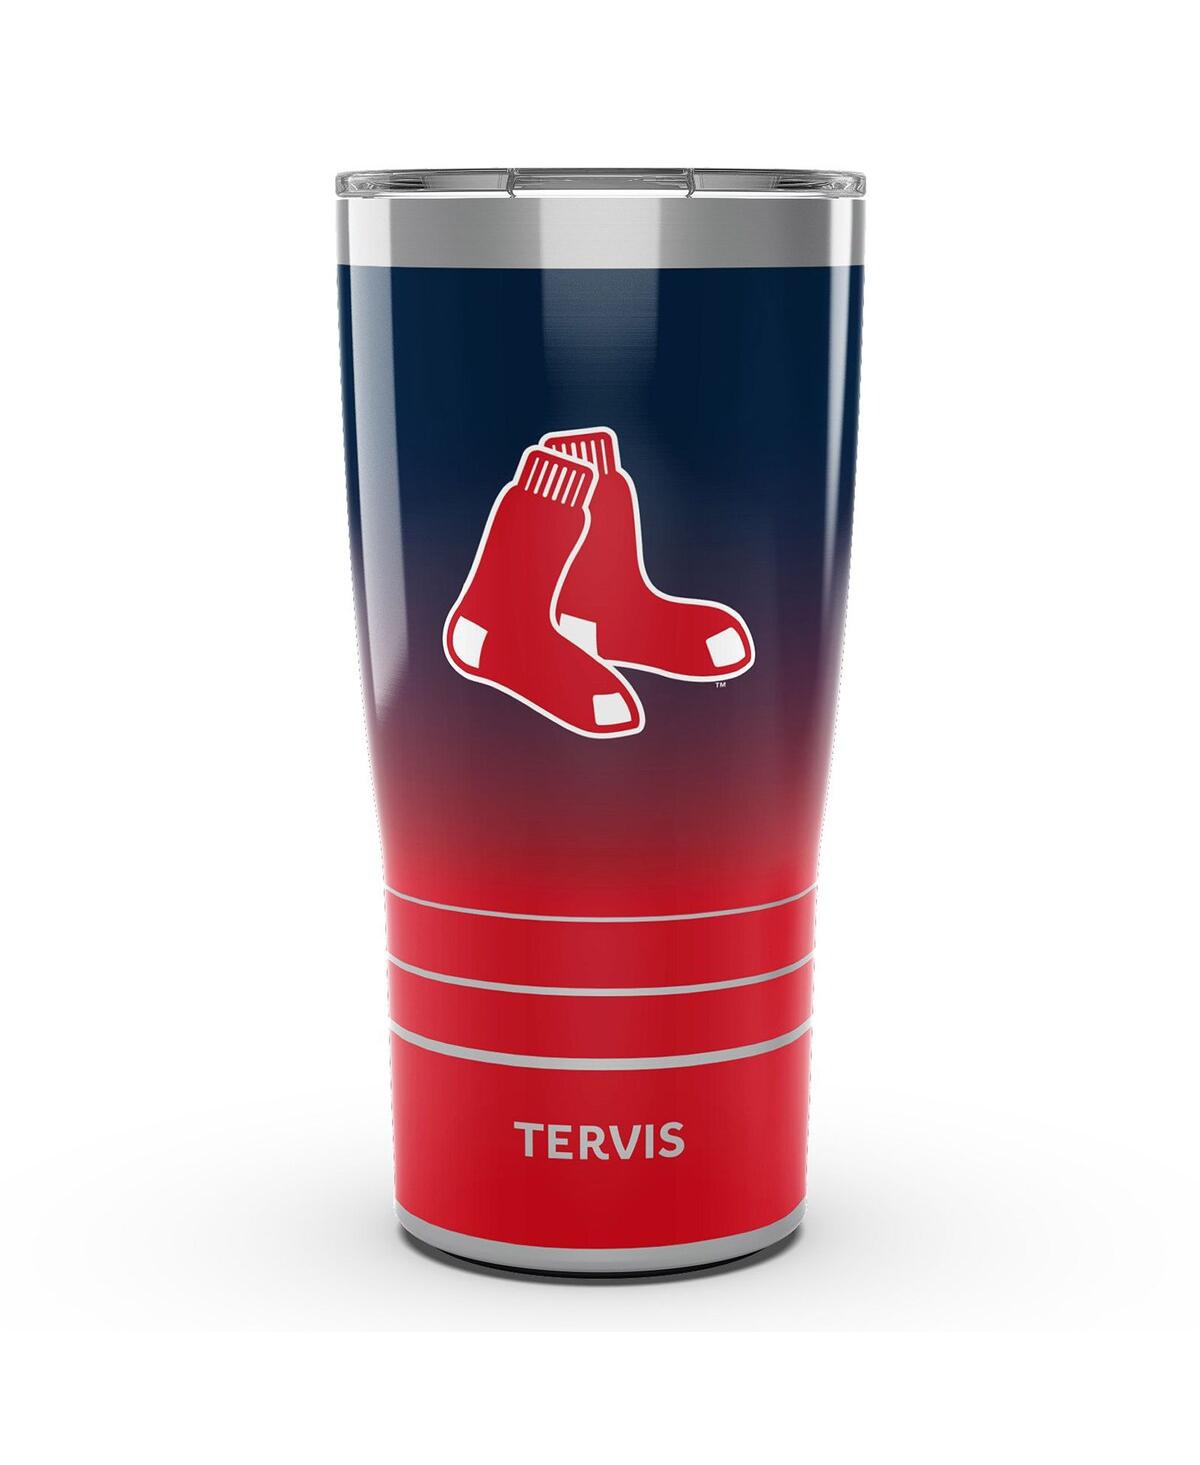 Tervis Tumbler Boston Red Sox 20 oz Ombre Stainless Steel Tumbler In Blue,red